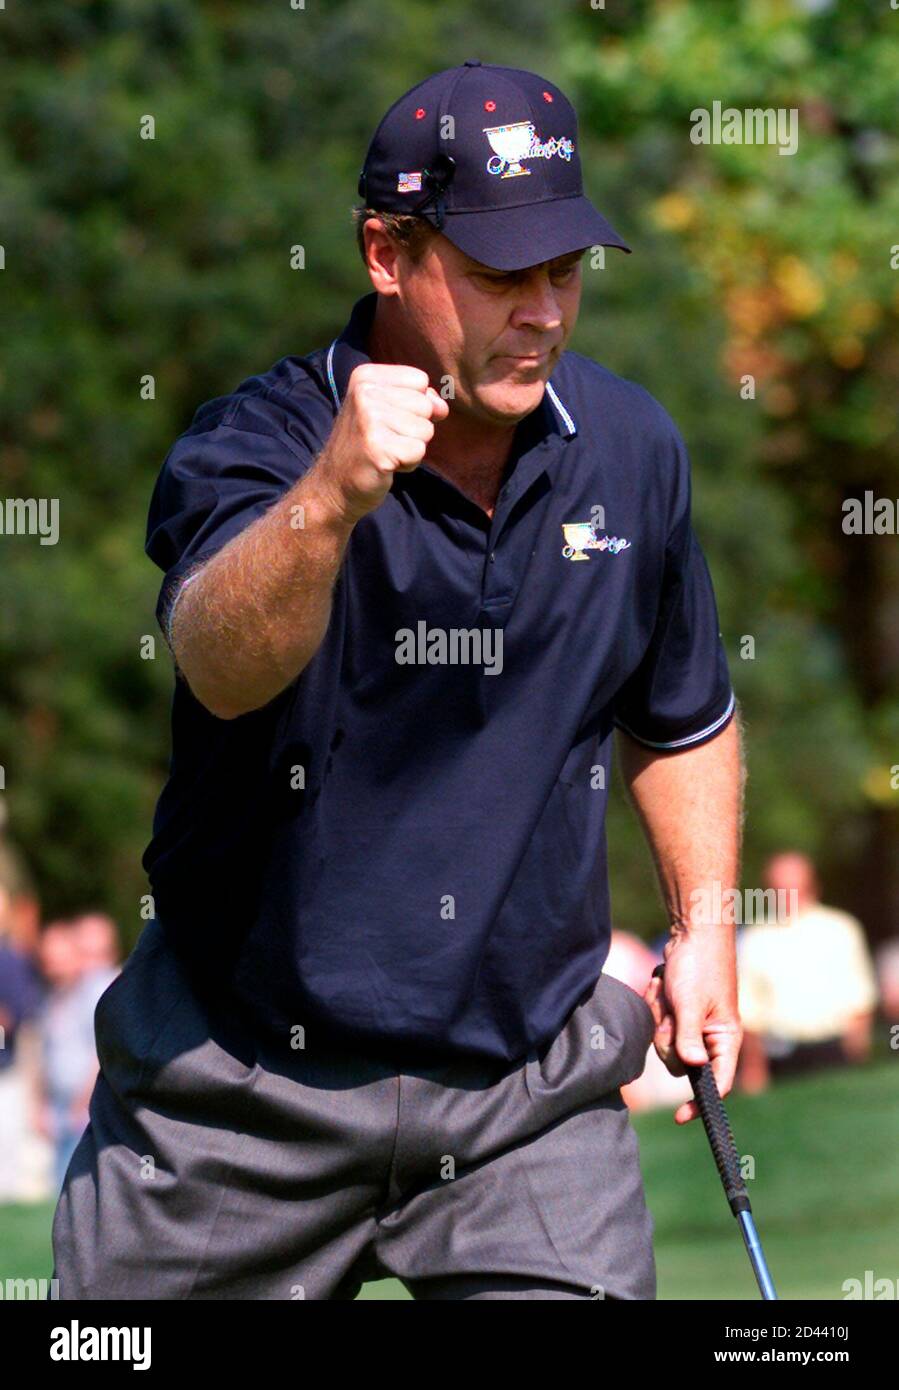 American Hal Sutton celebrates his birdie putt on the first hole of  President's Cup play at the Robert Trent Jones Golf Club in Lake Manassas,  October 21, 2000. Sutton and his partner